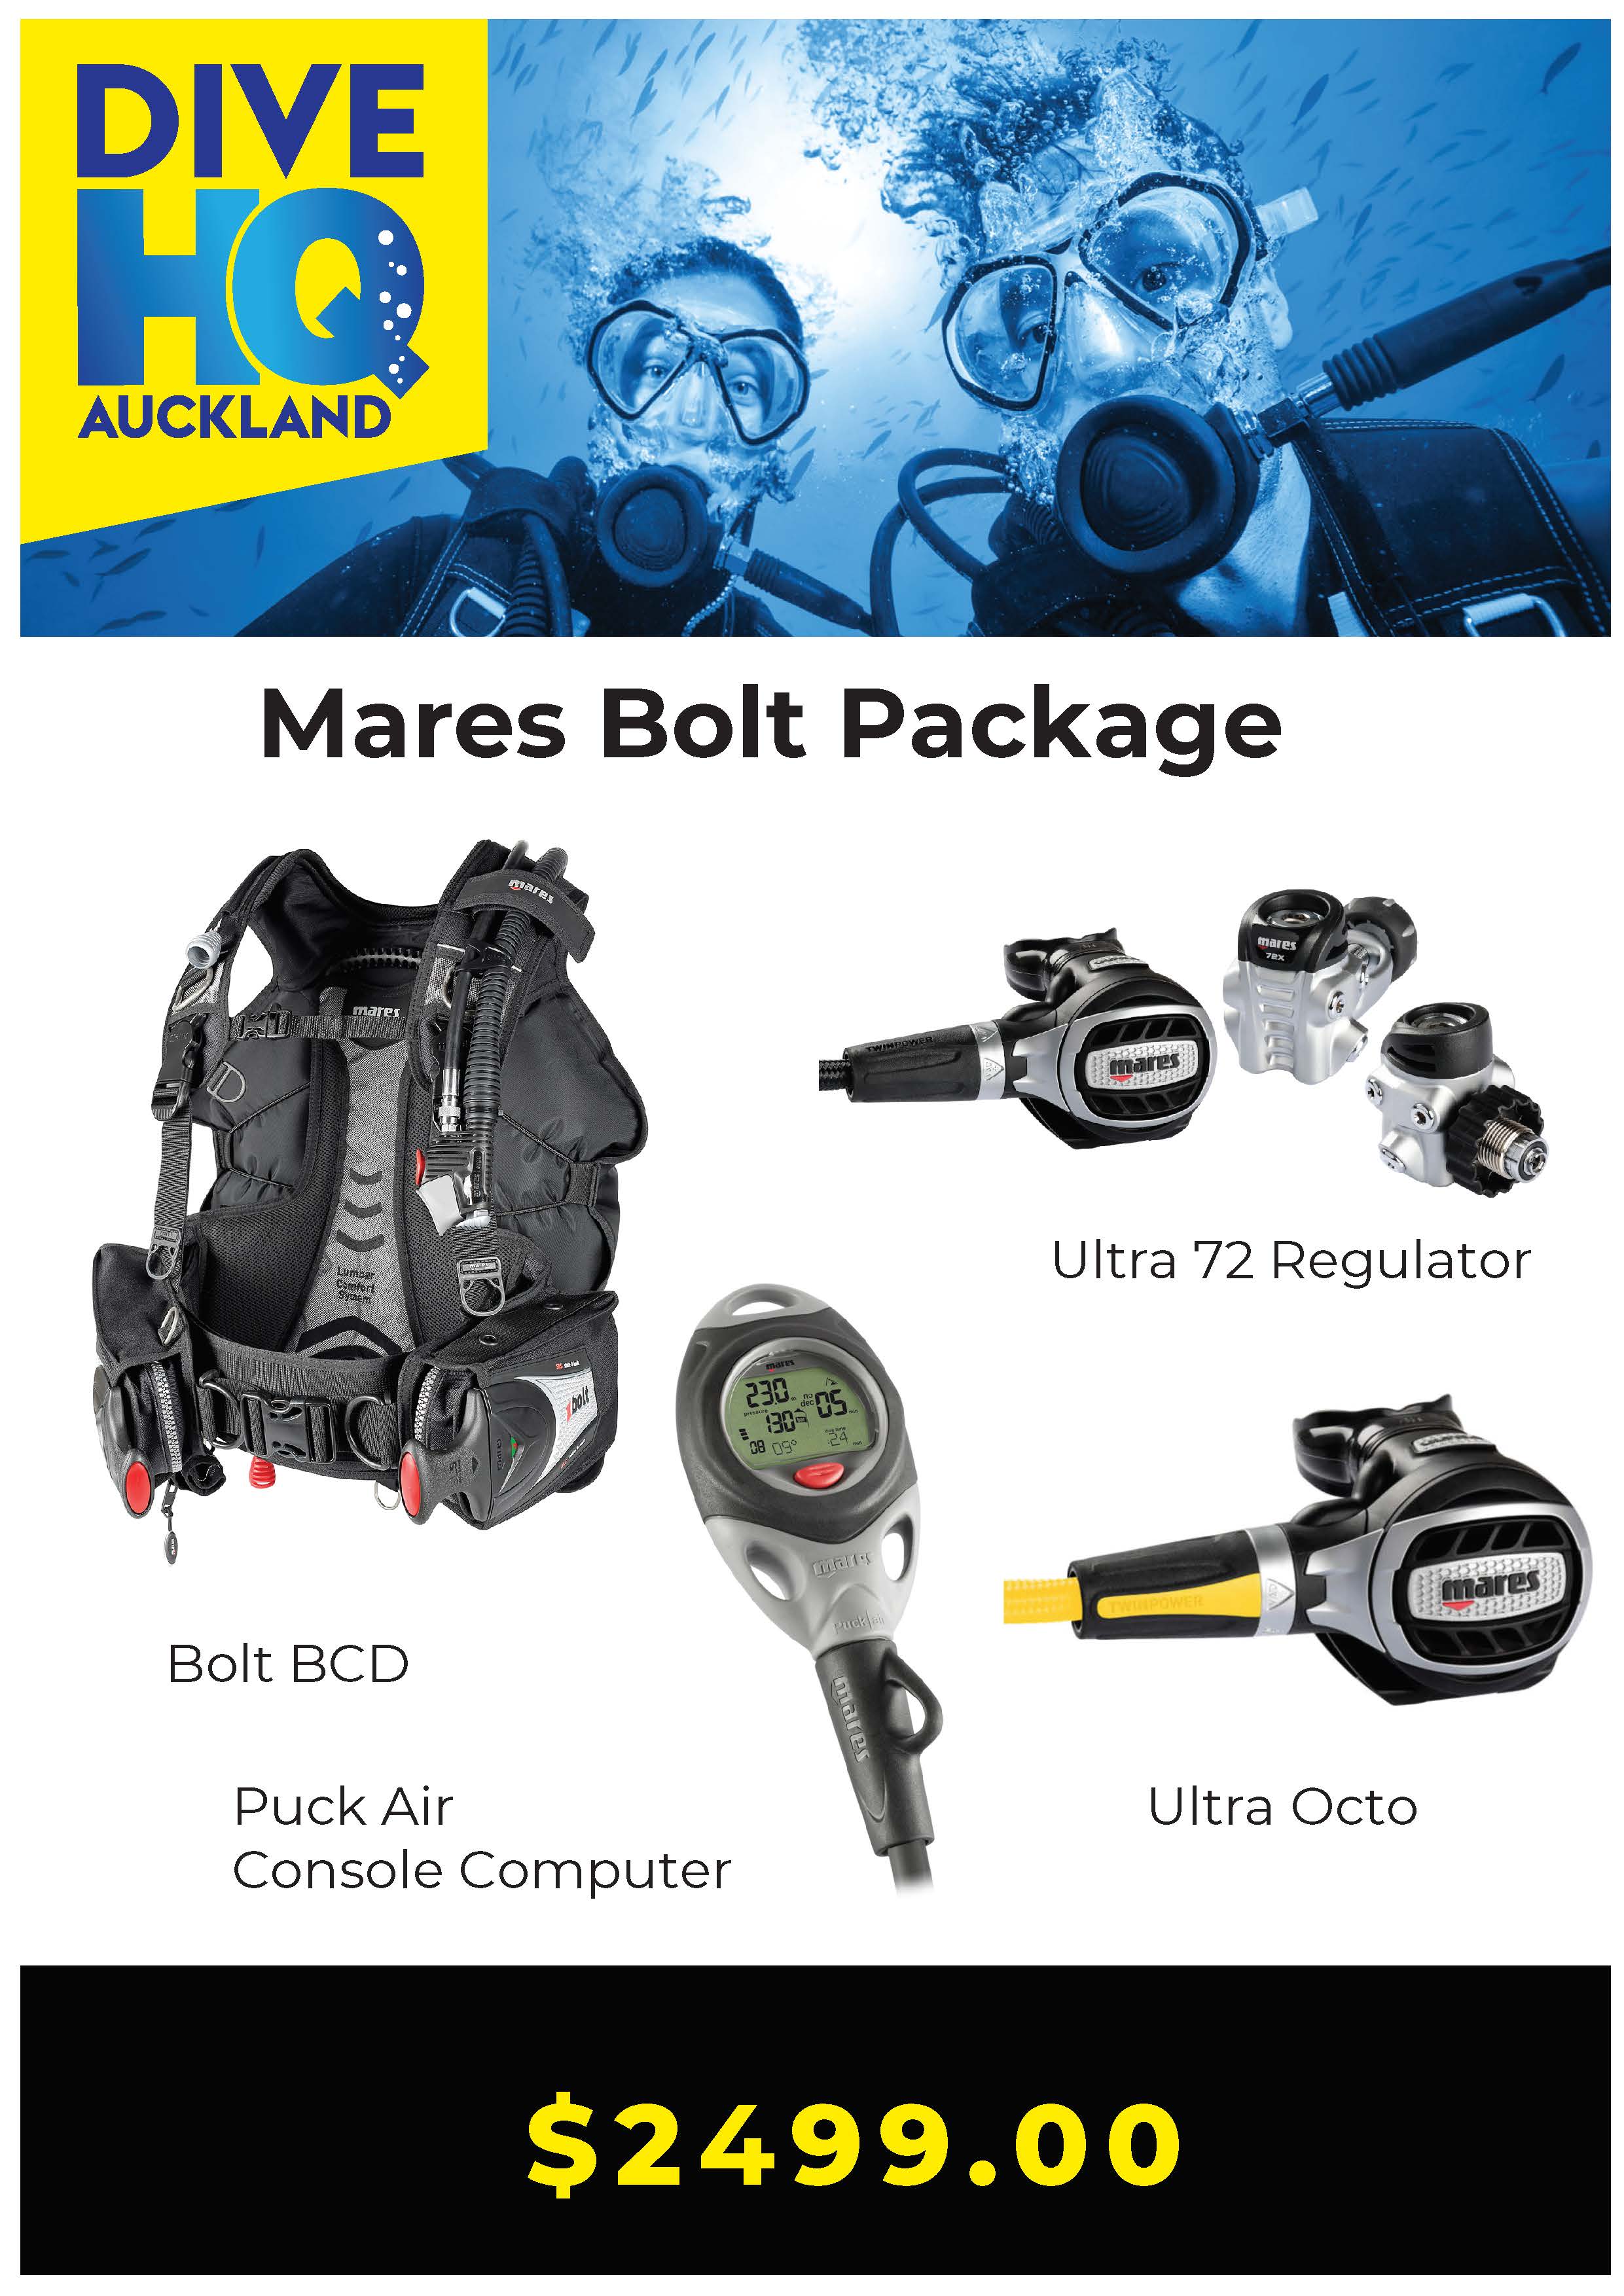 Mares Bolt Package